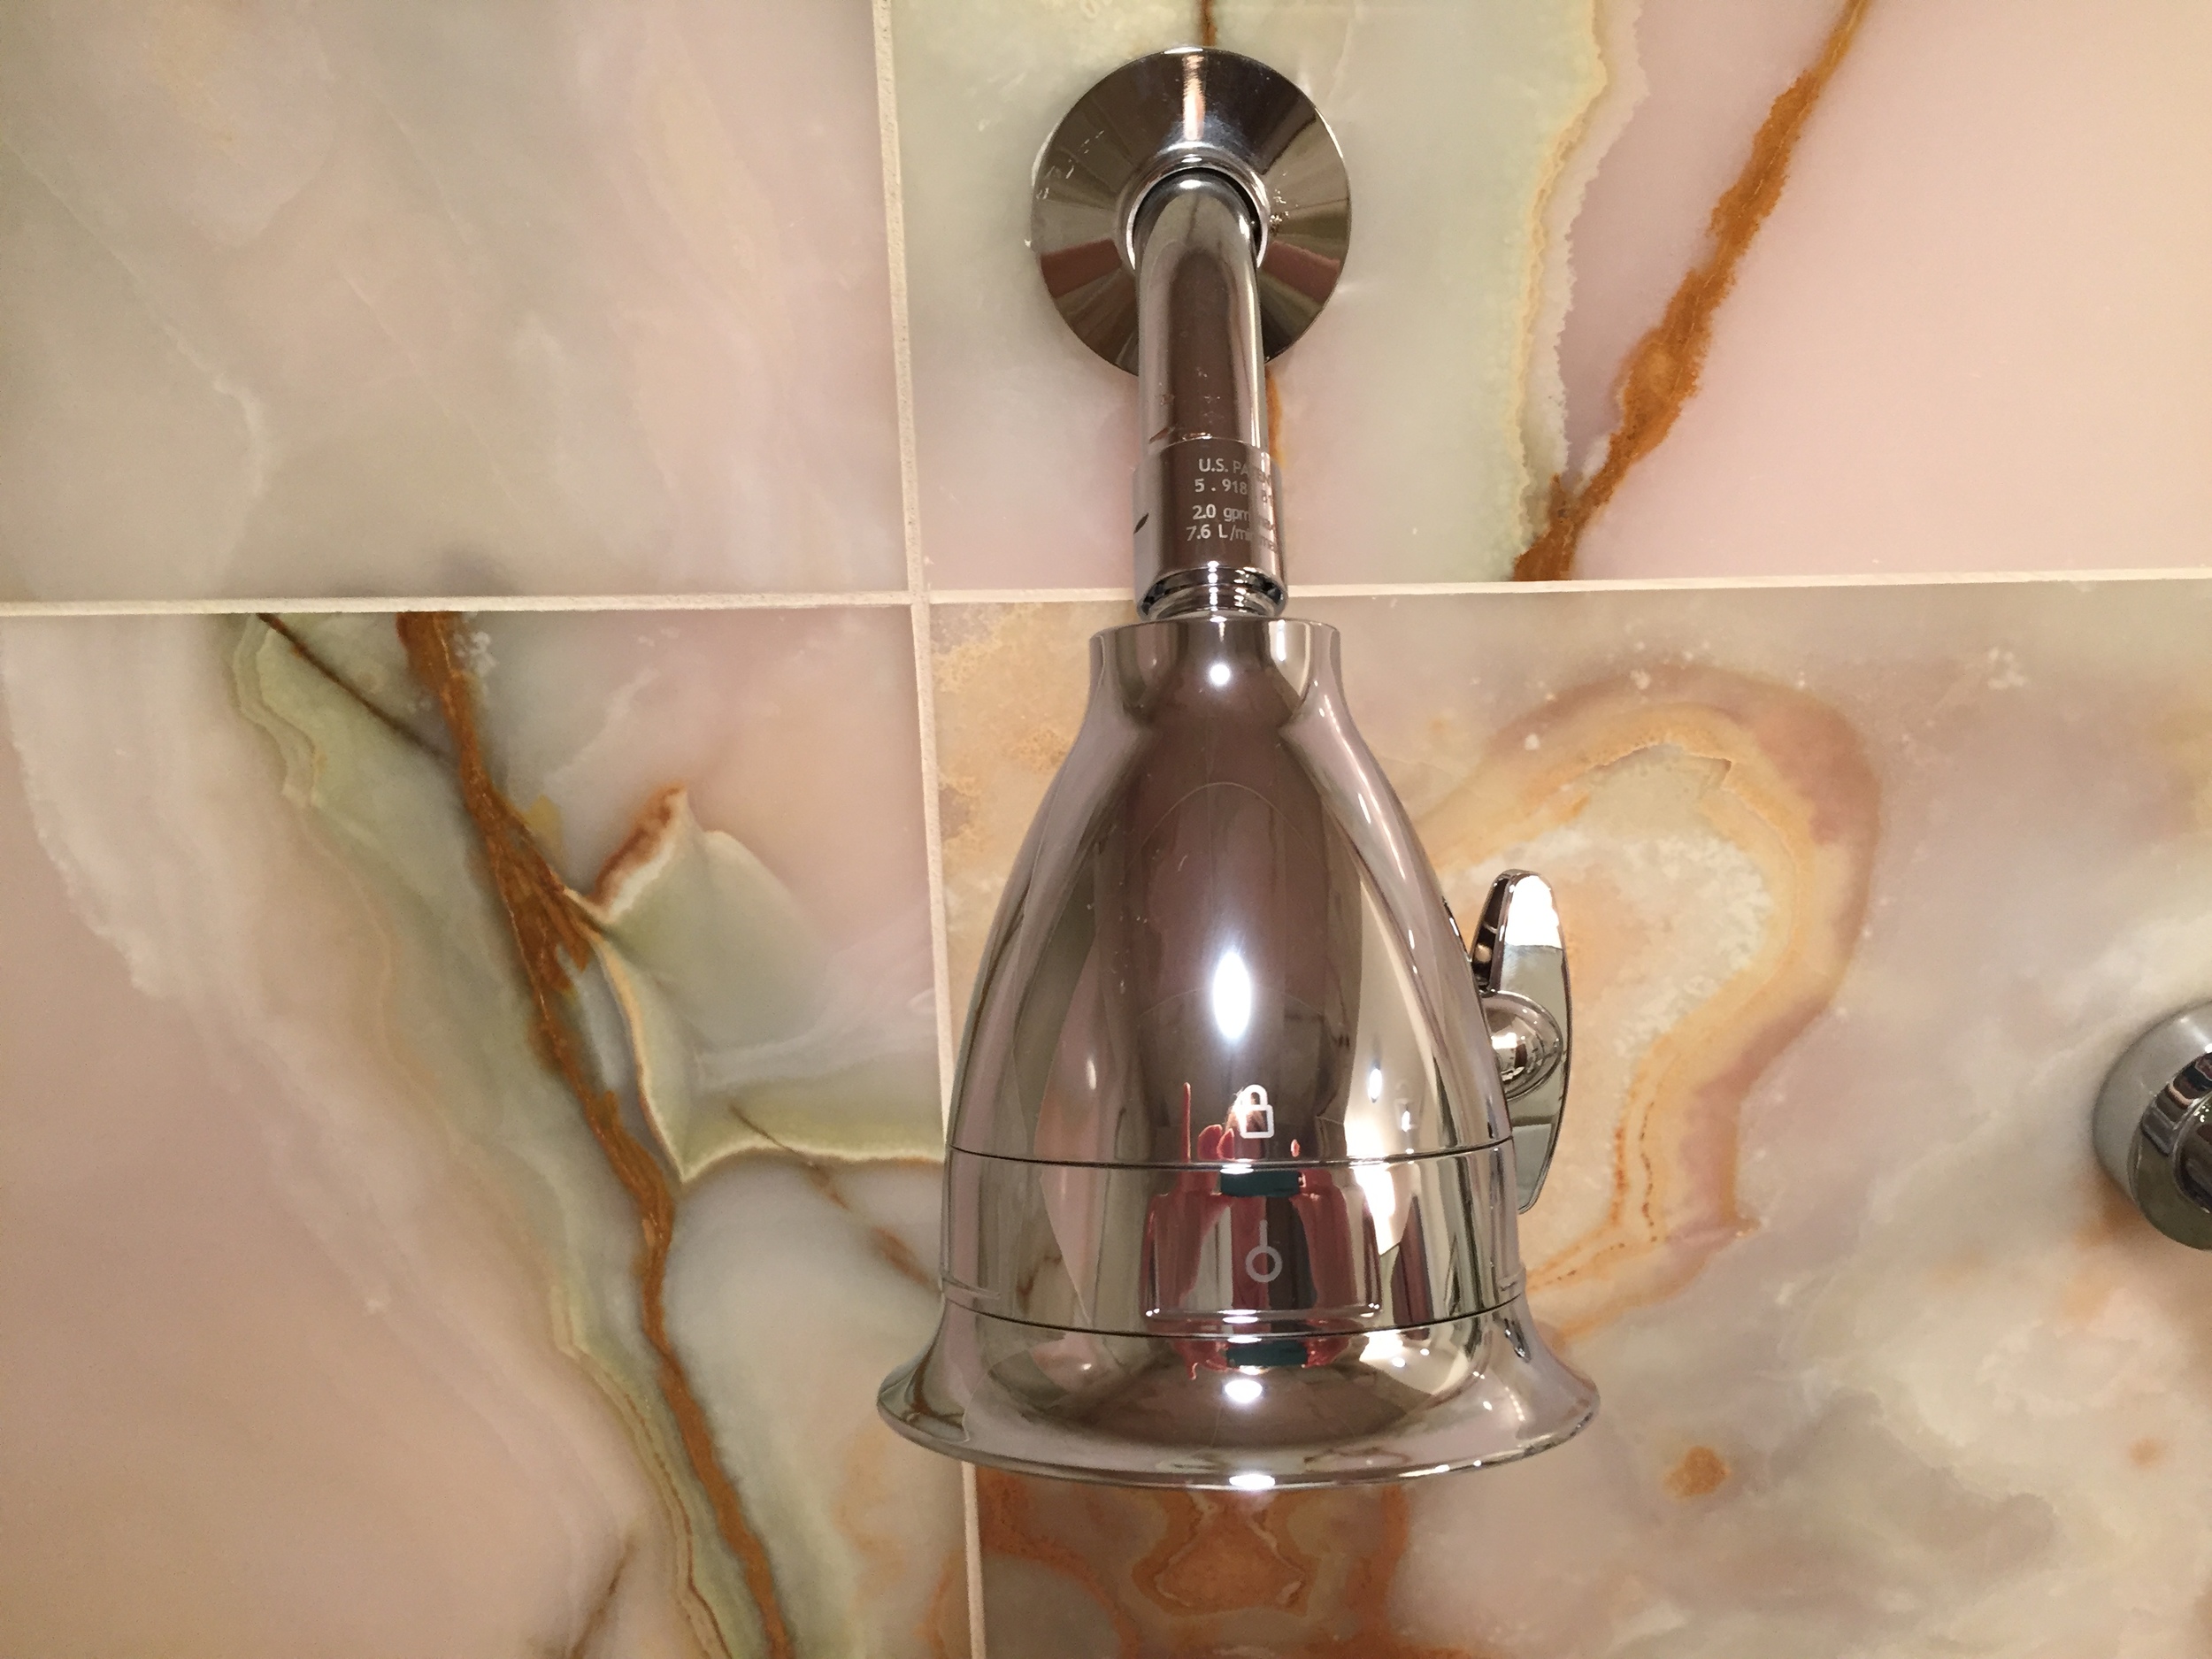 Install the new shower head by twisting clockwise